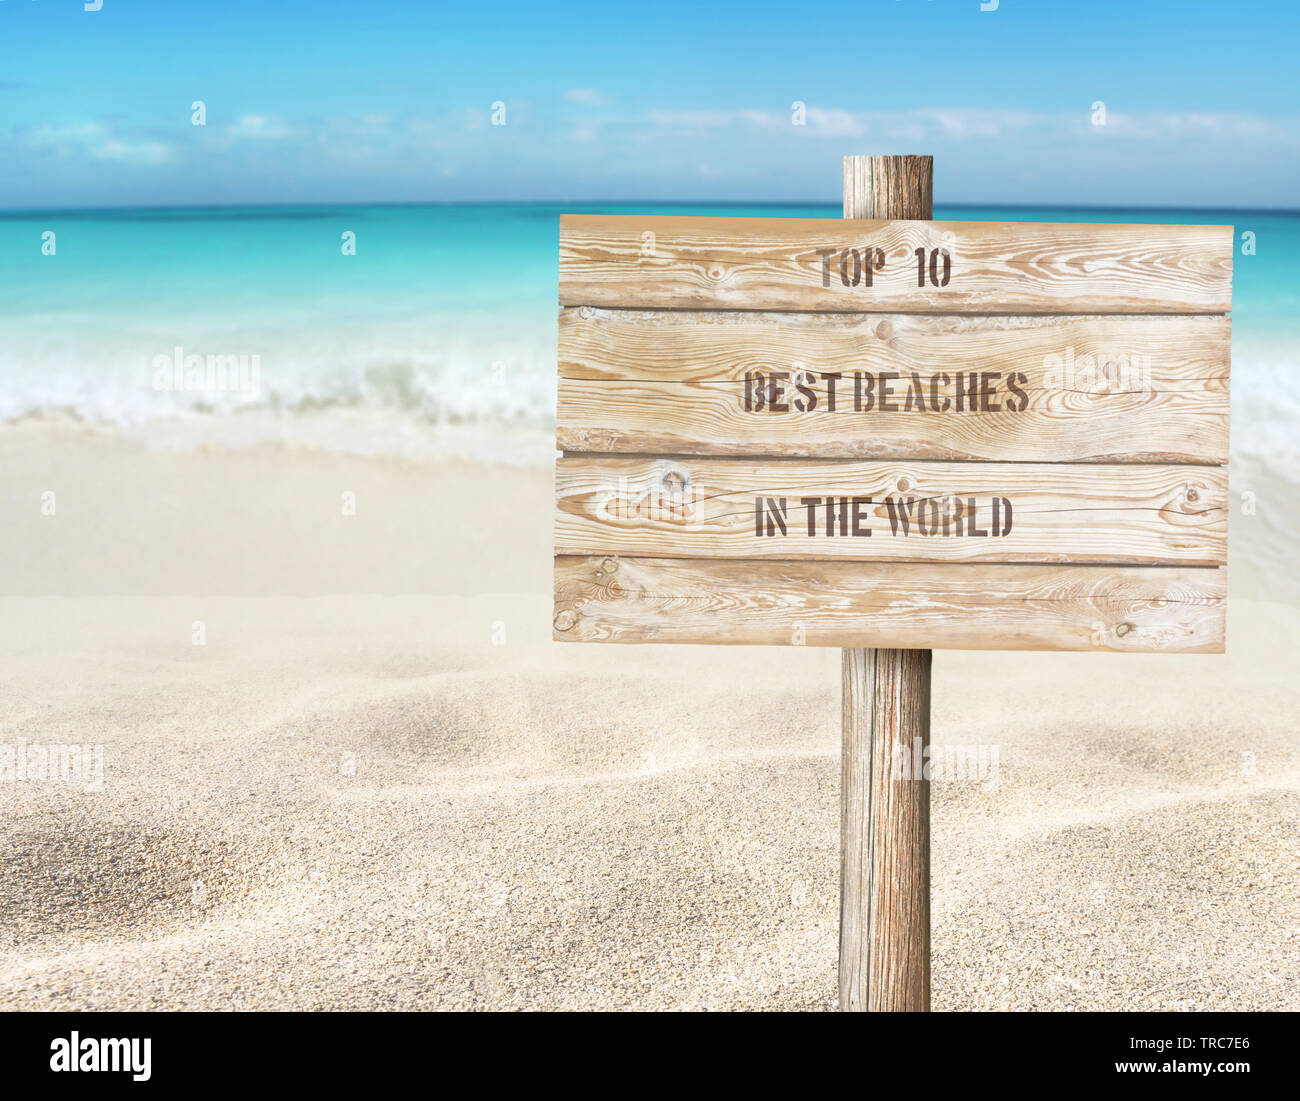 Top ten beaches in the world message on the wooden planks sign board on the beach blurred background.  Tropical island paradise. Sandy shore washing b Stock Photo